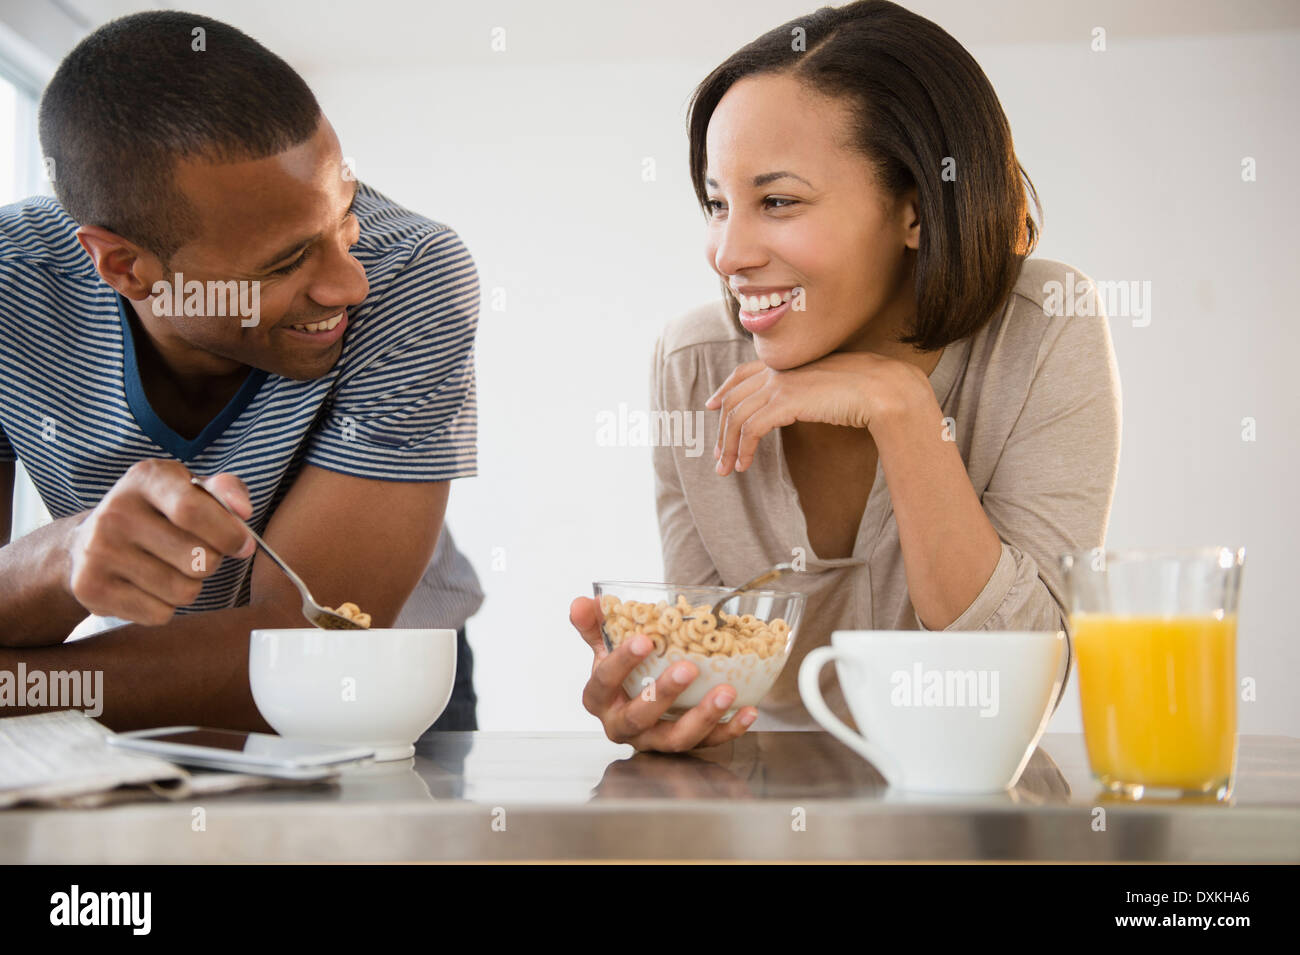 Heureux couple eating cereal Banque D'Images